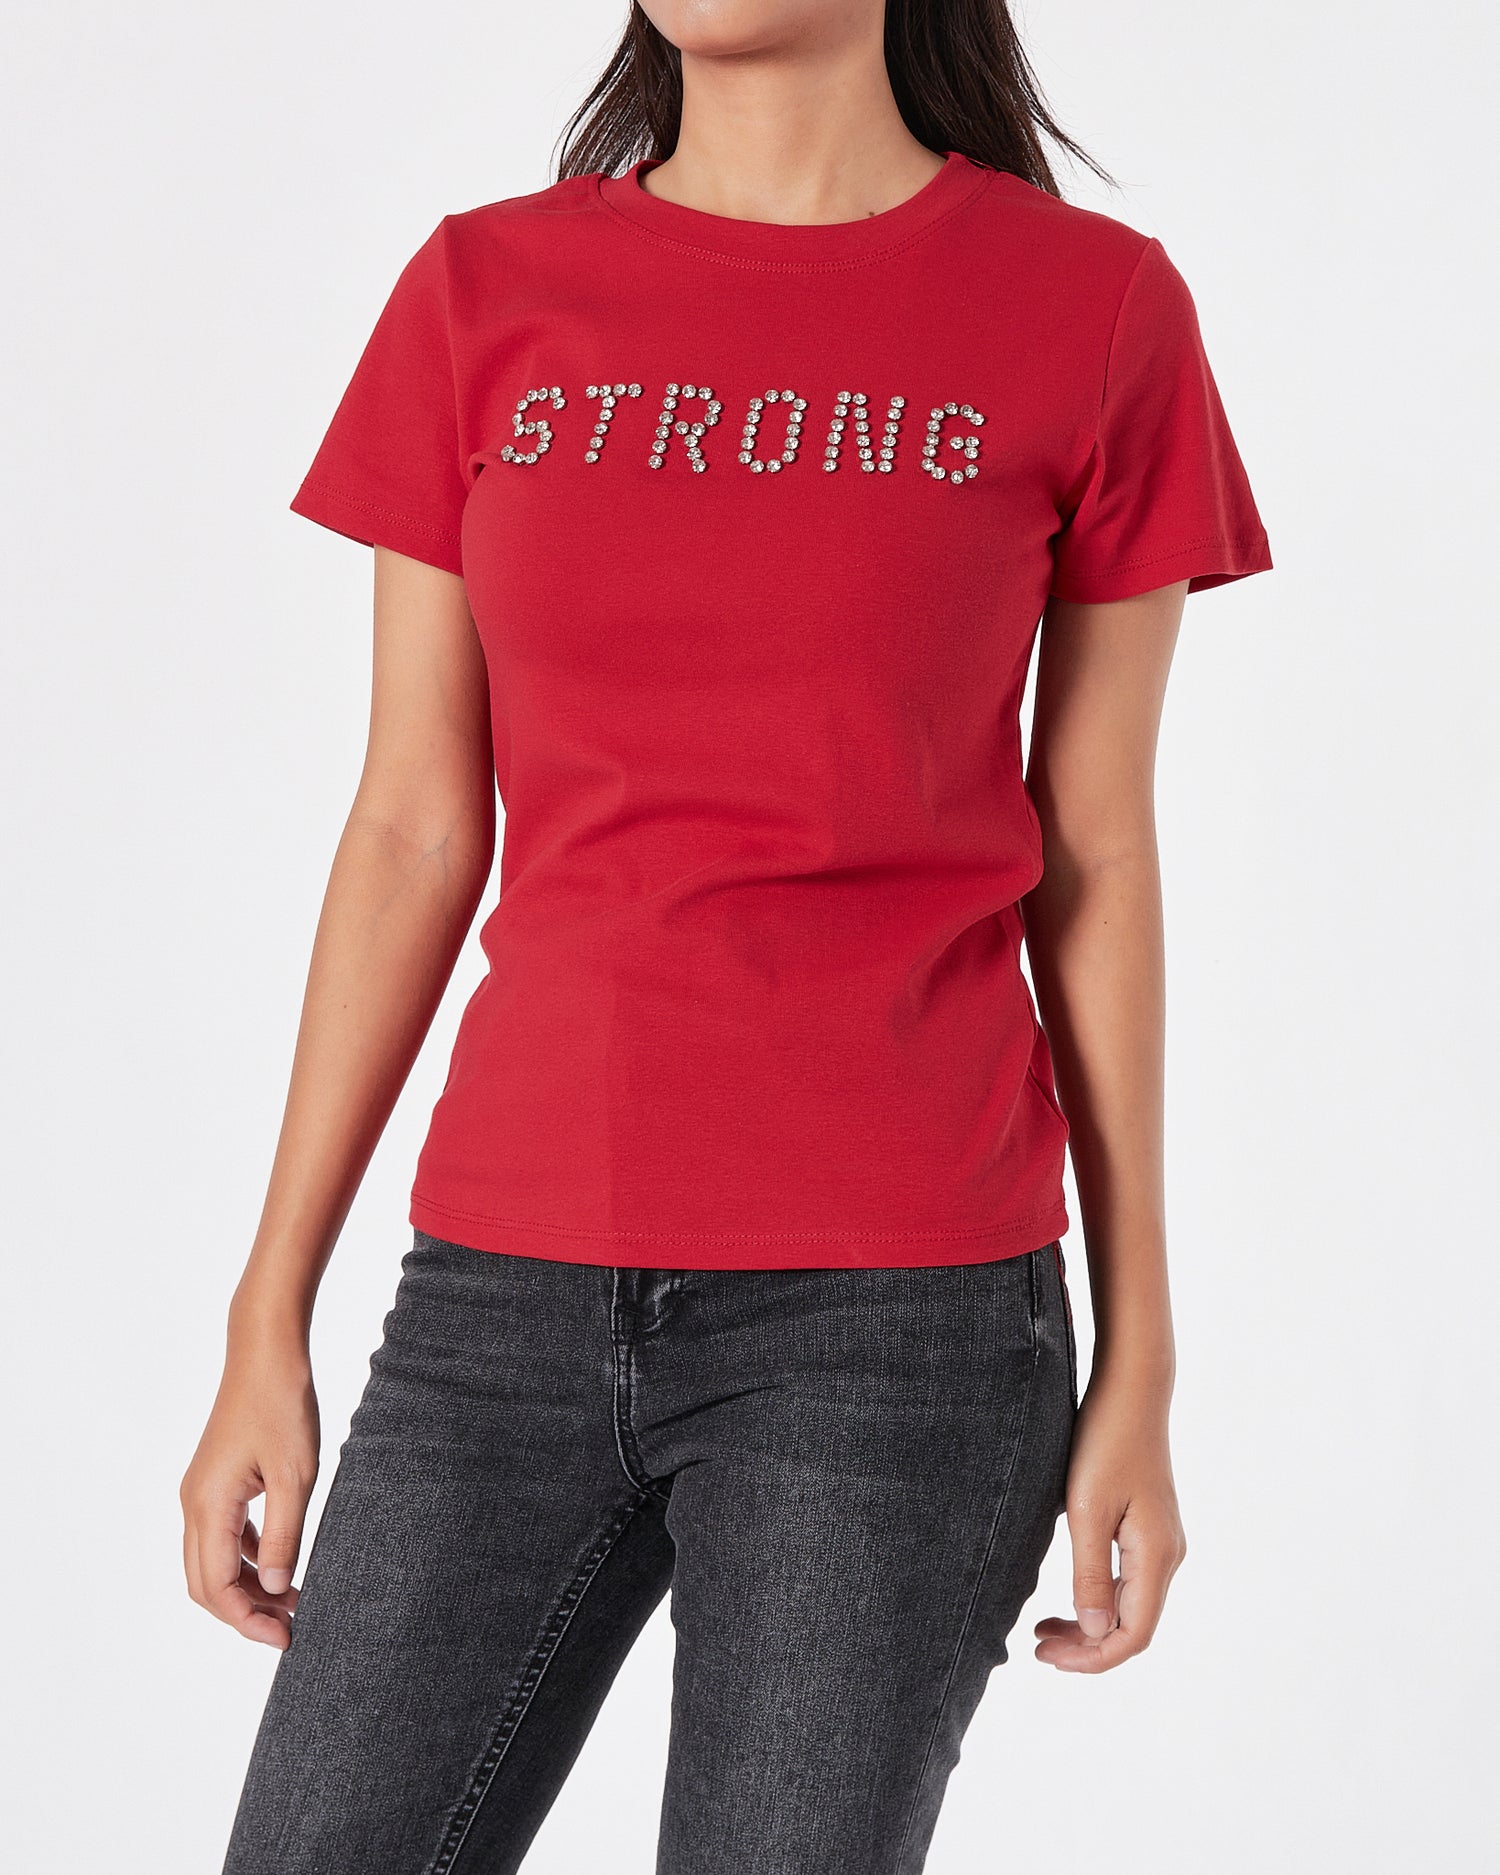 Strong Rhinestone Lady Red T-Shirt 11.90